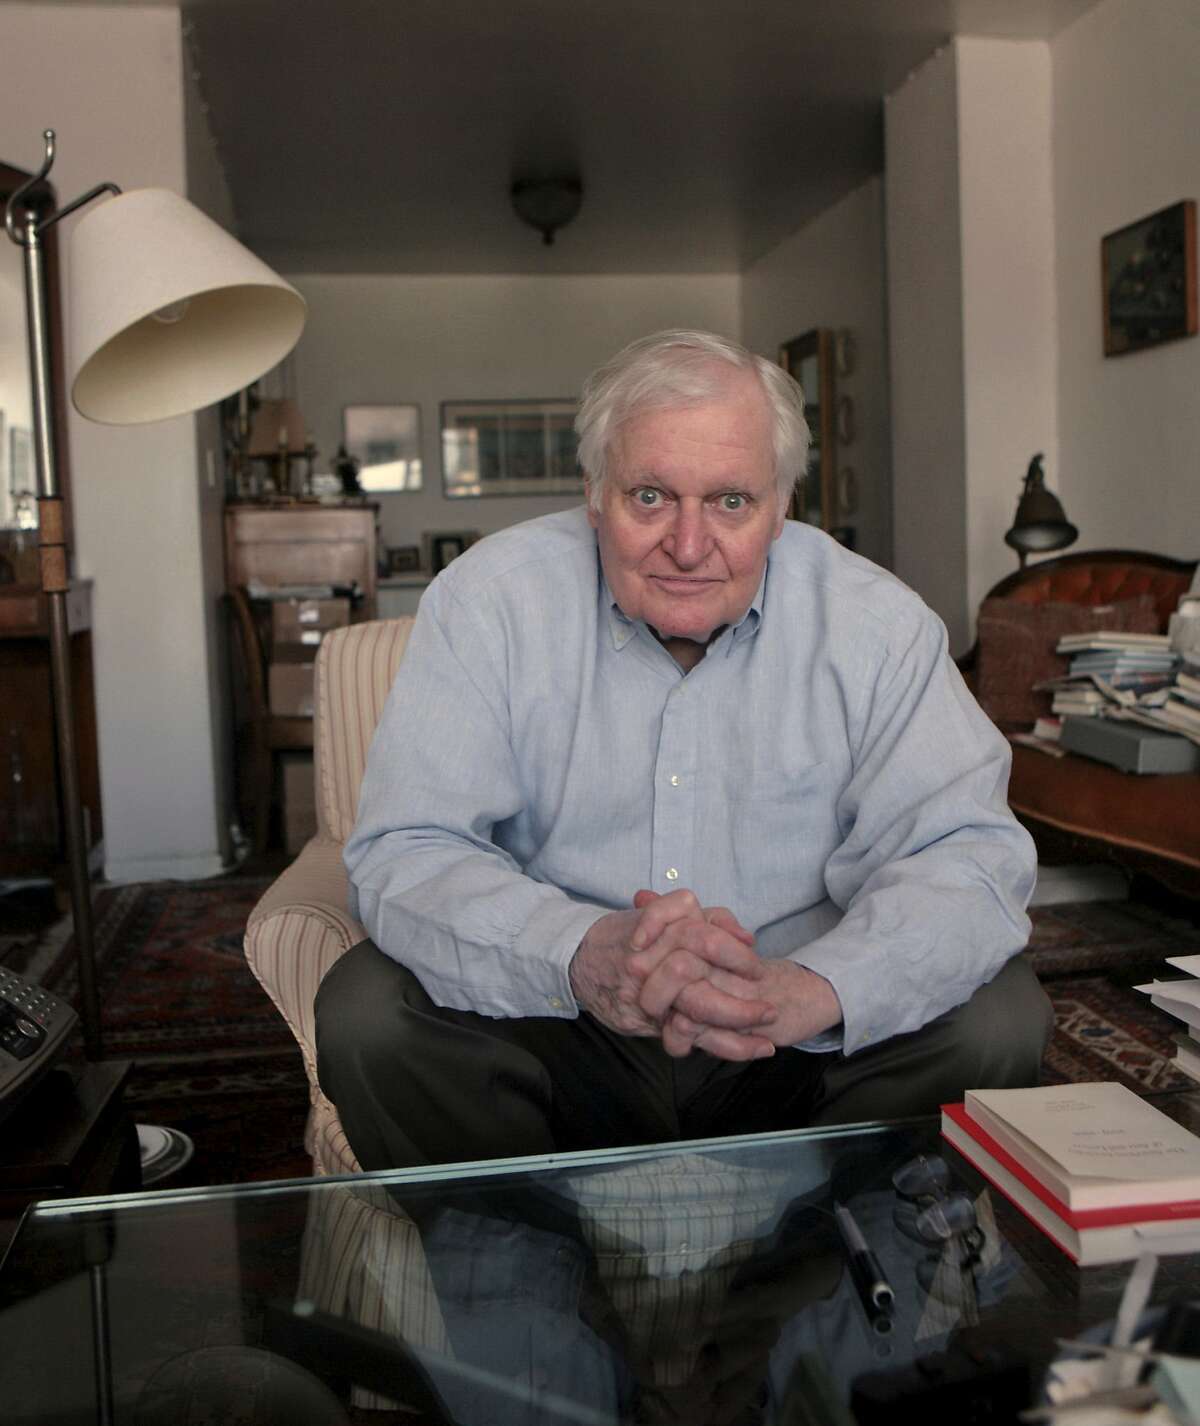 FILE - In this Sept. 29, 2008, file photo, Poet John Ashbery interviewed at his apartment in New York. Ashbery, widely regarded as one of the world's greatest poets, died Sunday, Sept. 3, 2017, at home in Hudson, New York, of natural causes, according to husband, David Kermani. He was 90. (AP Photo/Bebeto Matthews, File)